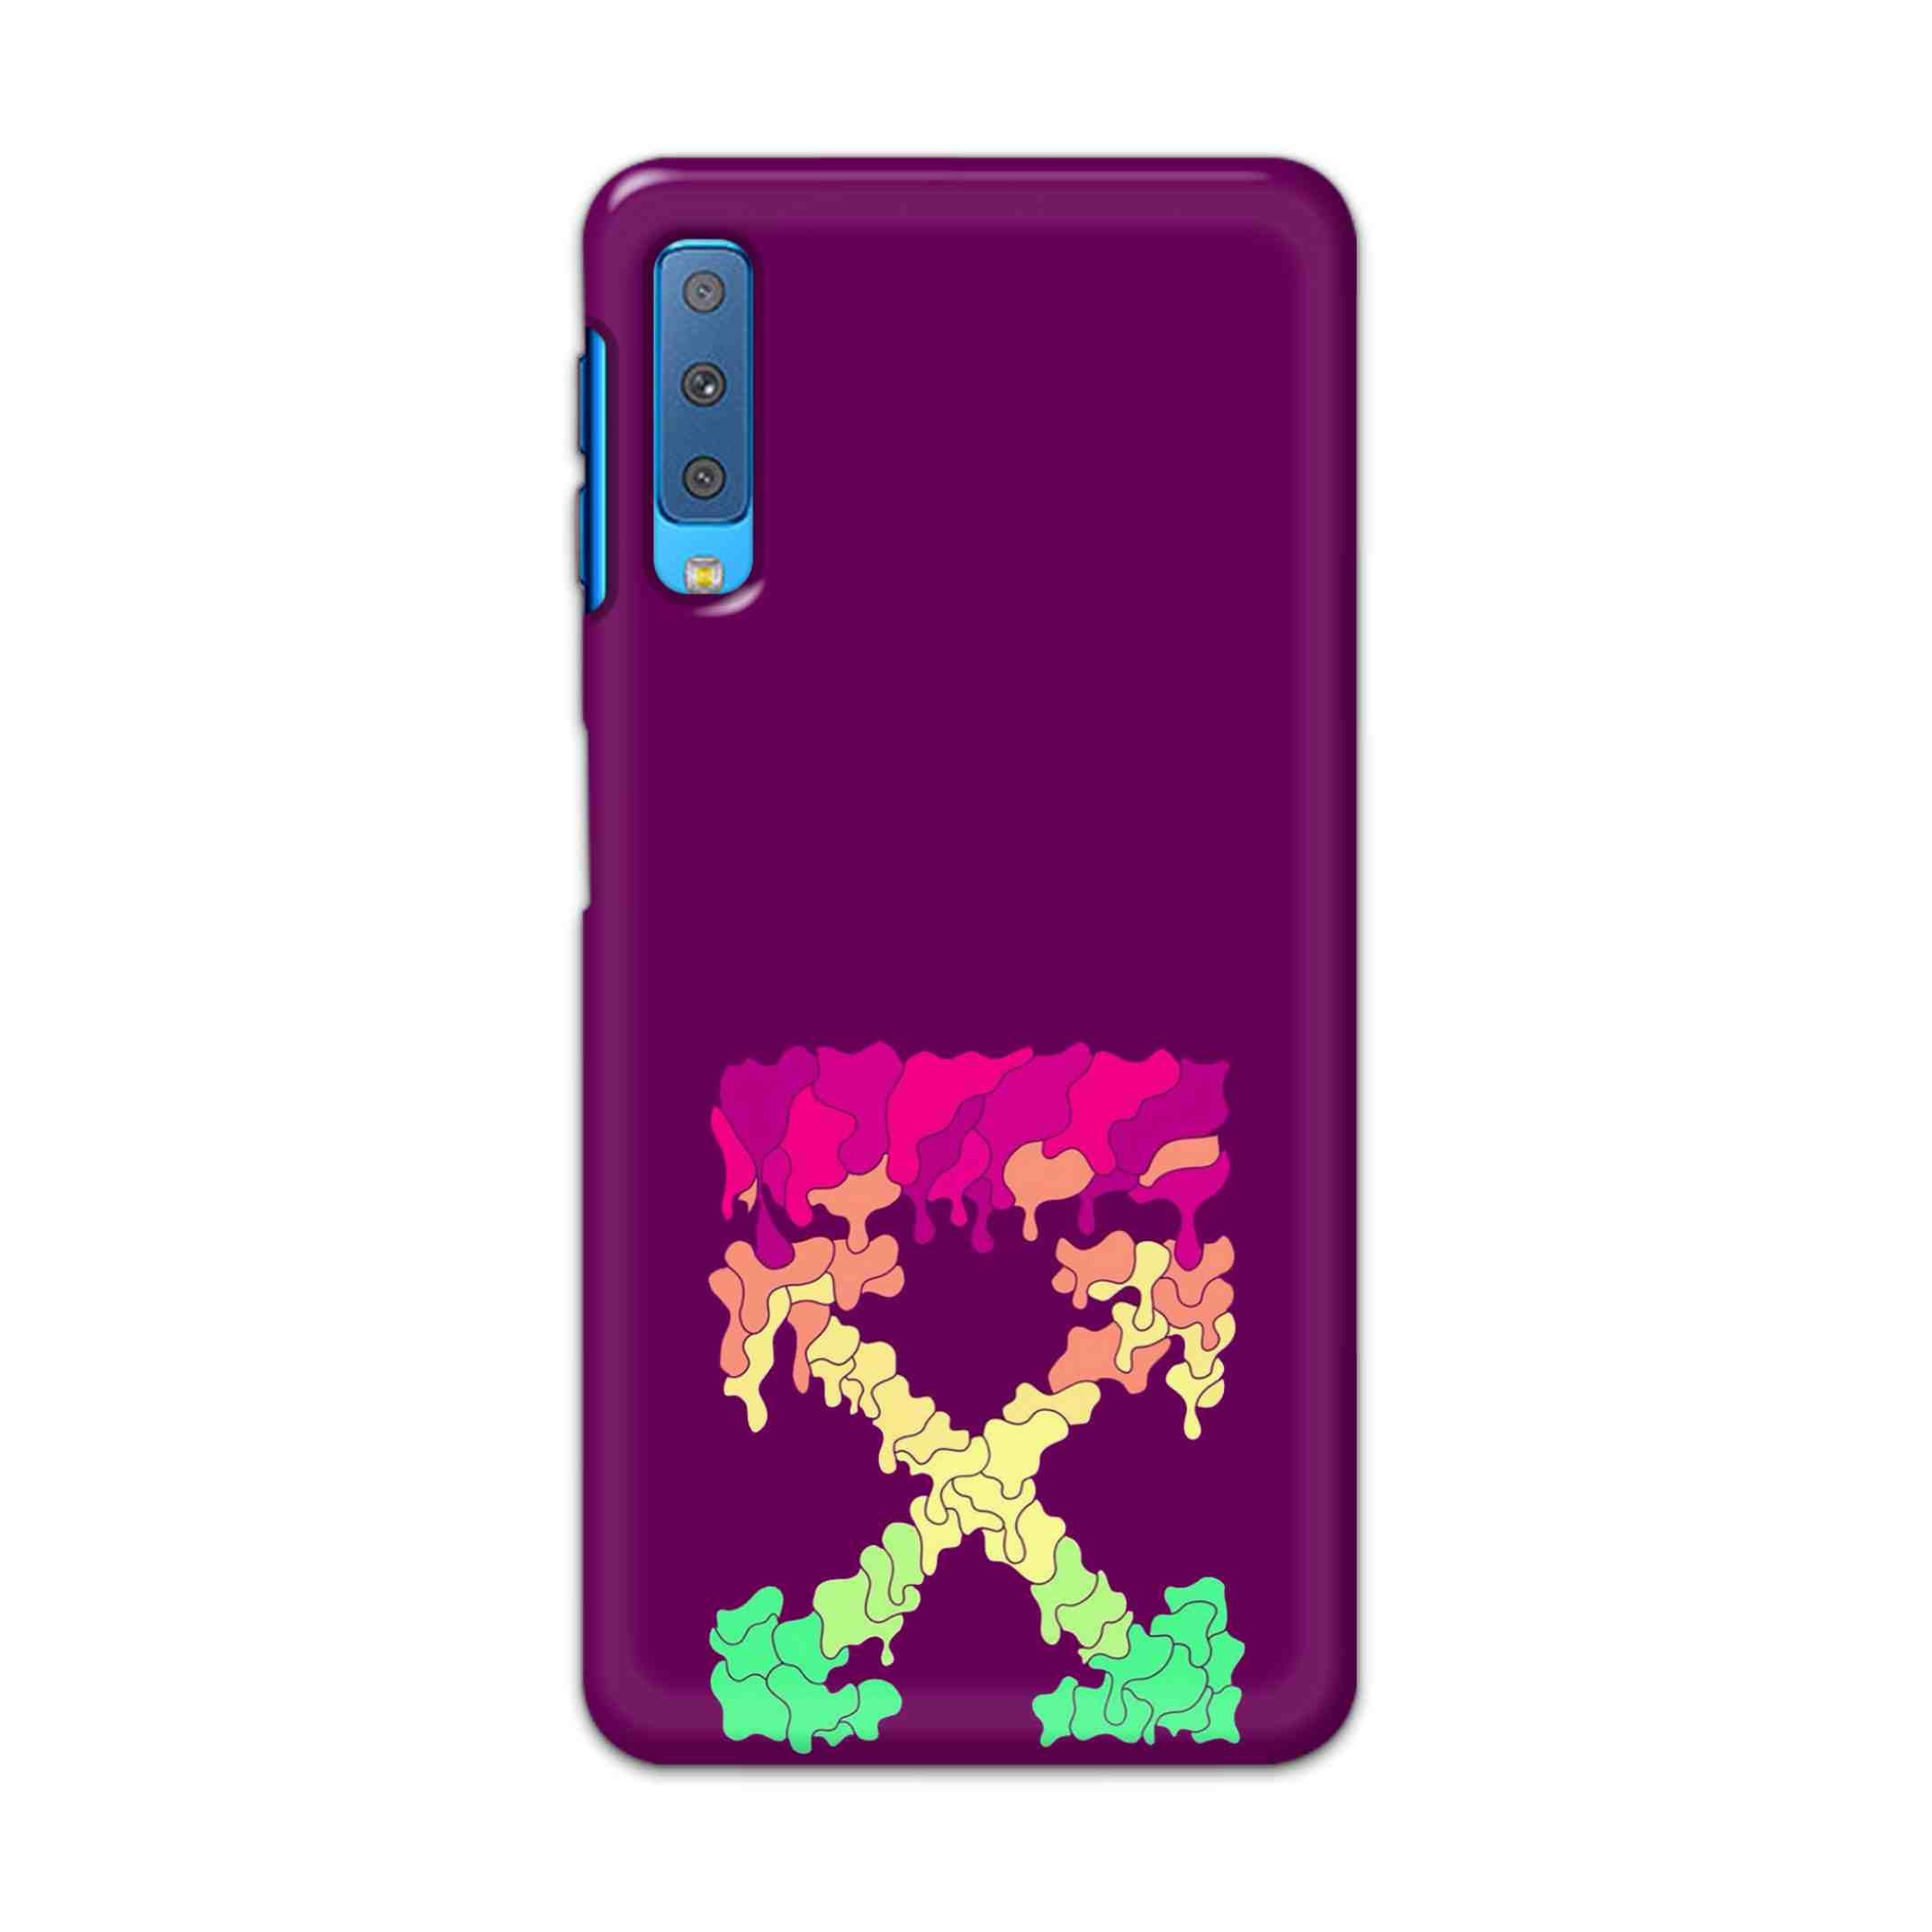 Buy X.O Hard Back Mobile Phone Case Cover For Samsung Galaxy A7 2018 Online